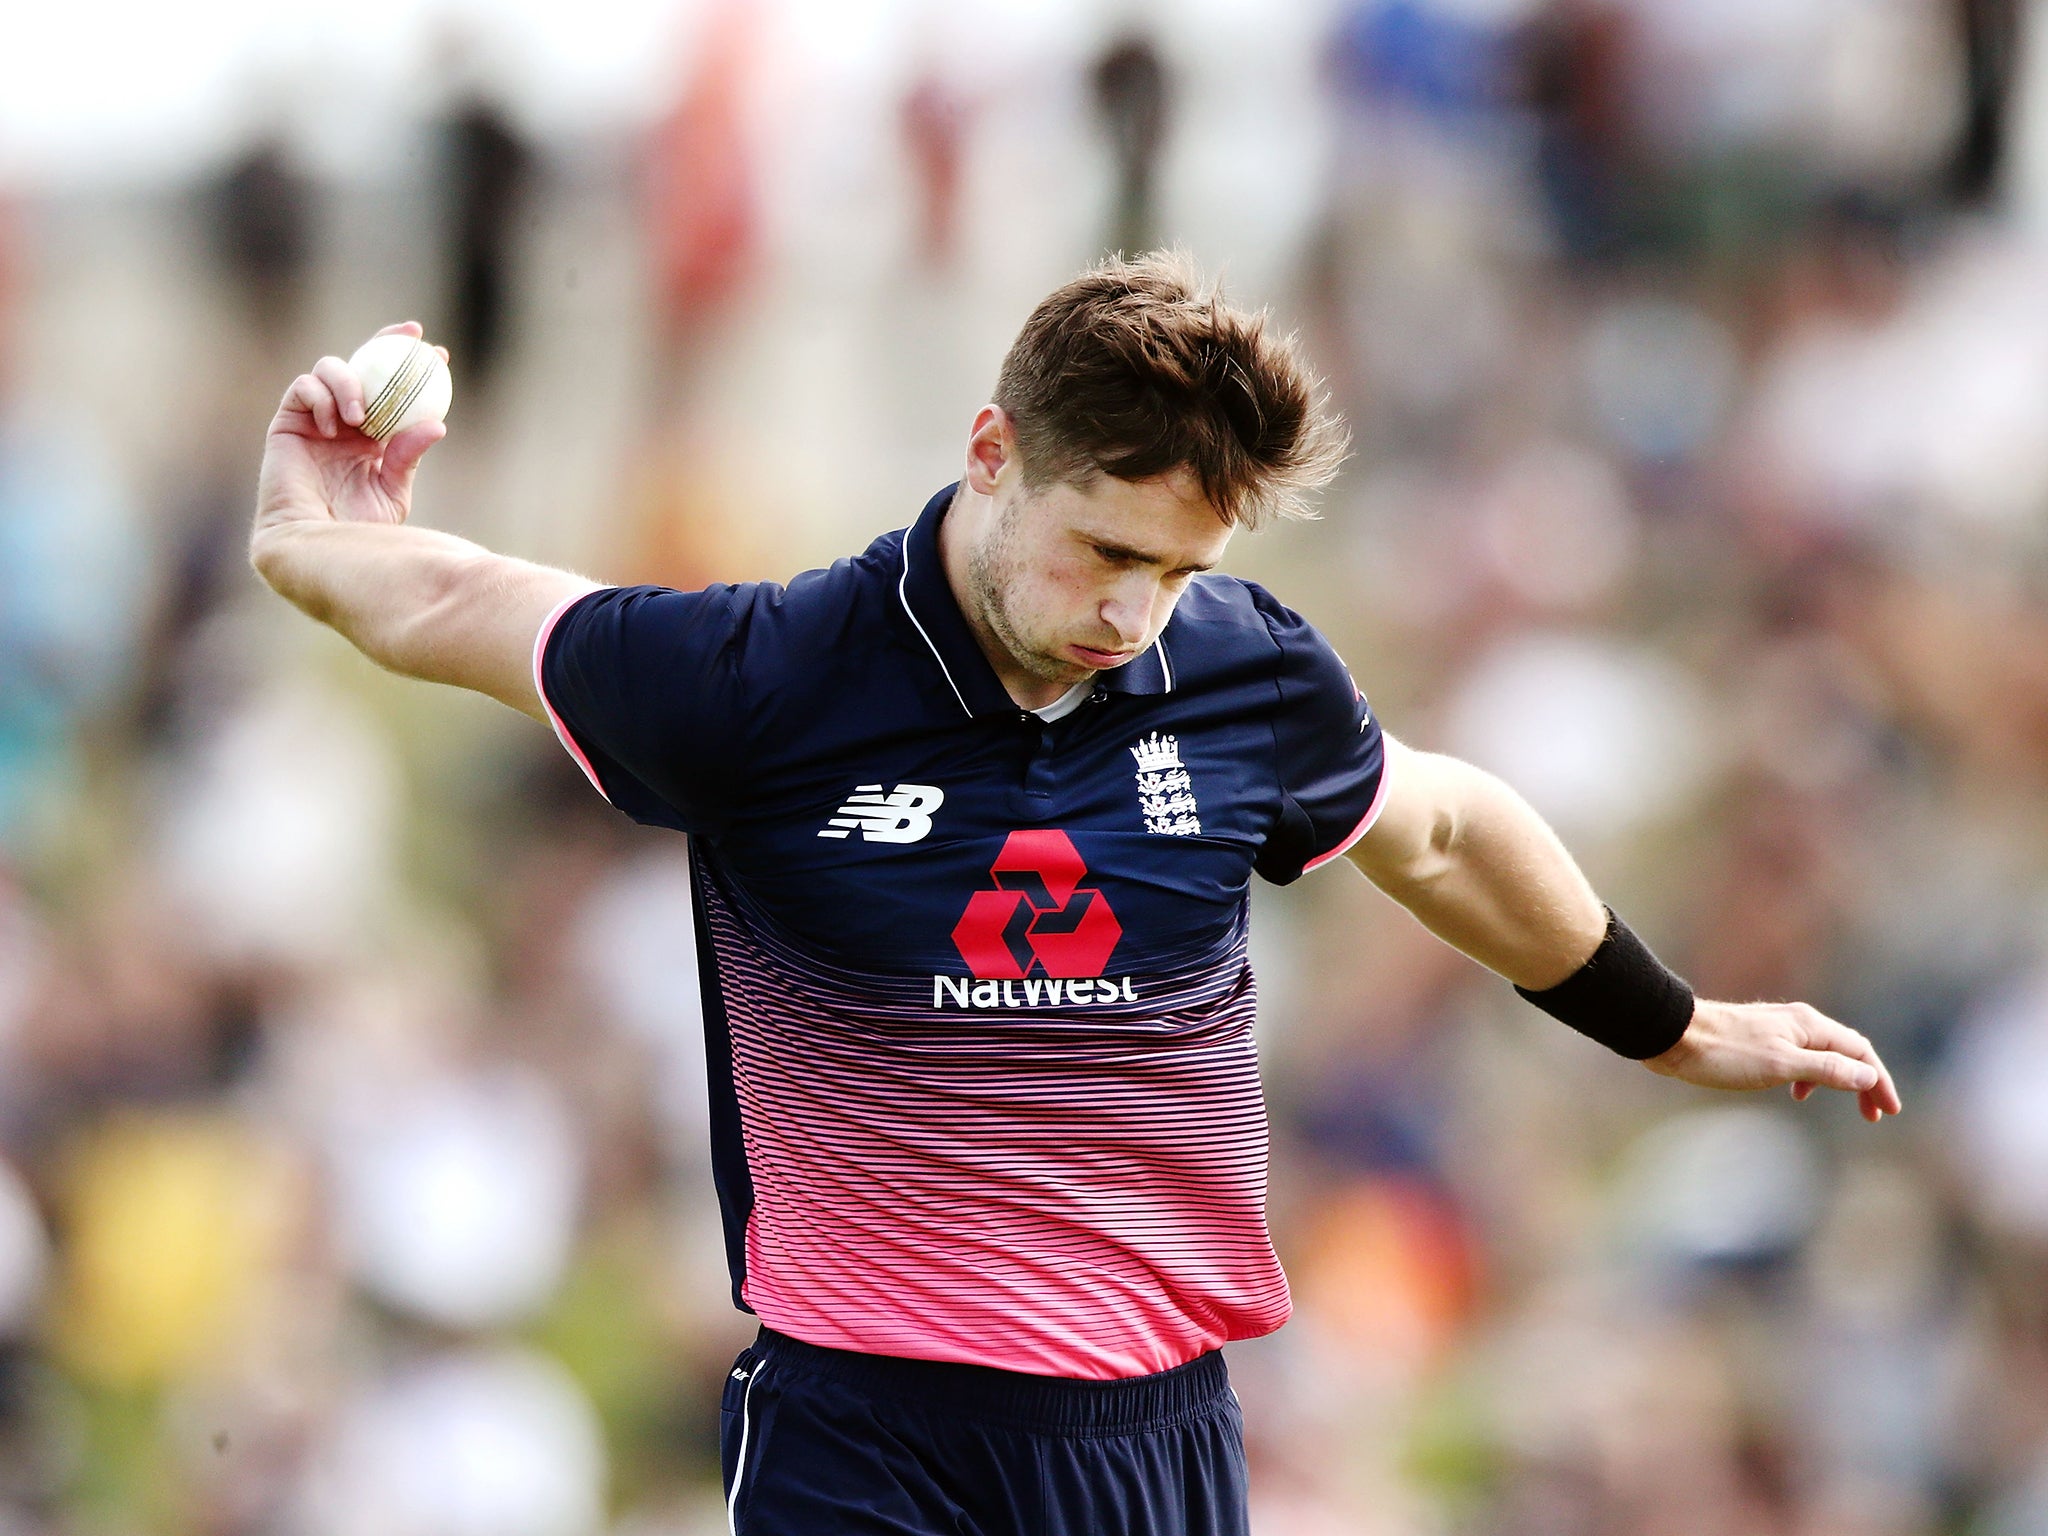 Chris Woakes picked up two wickets along with Stokes